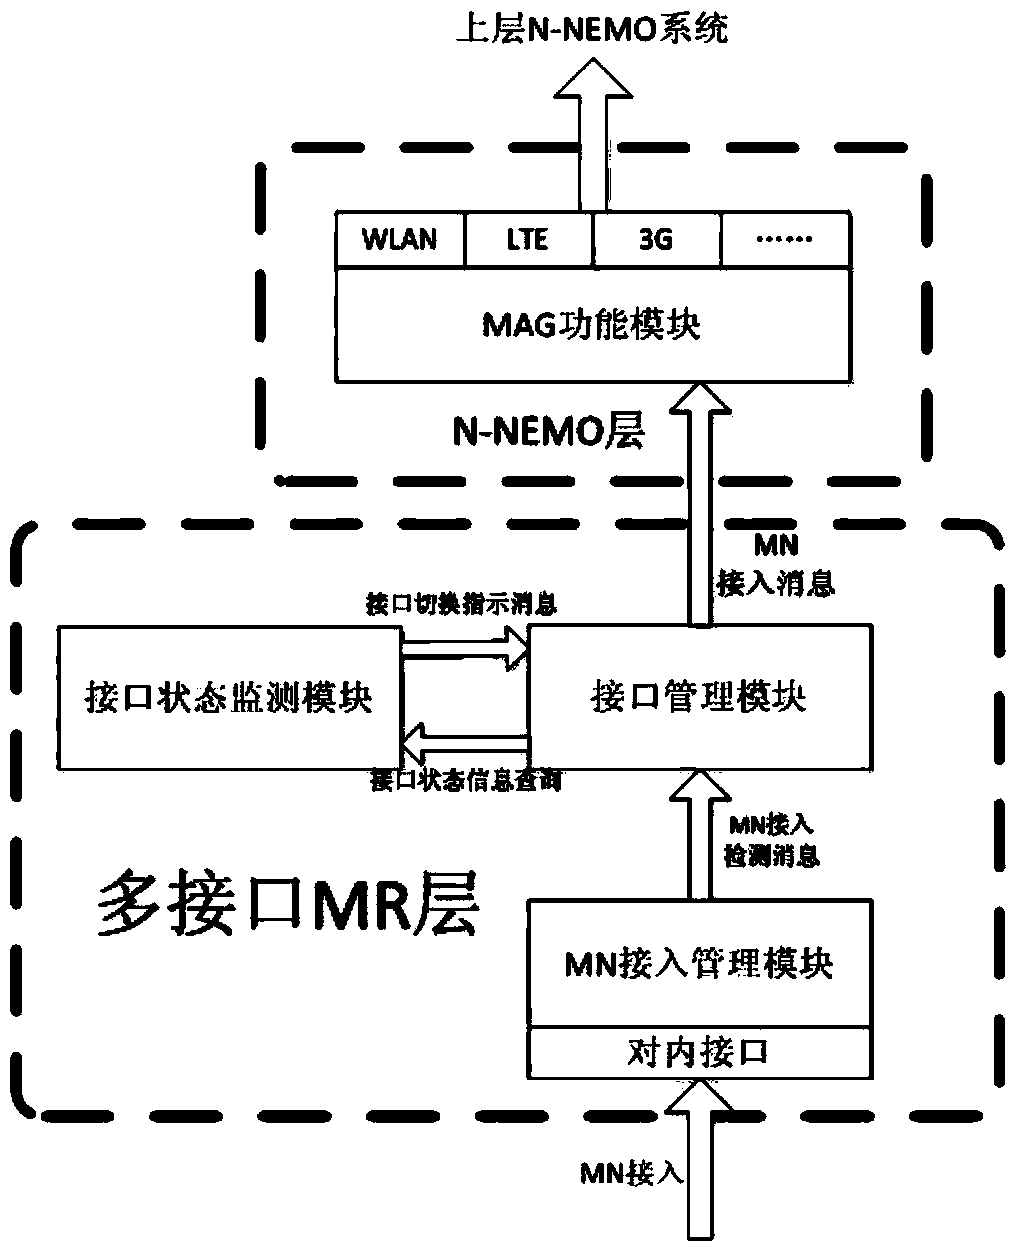 Network mobility multi-interface access implementation method and system based on N-PMIPv6